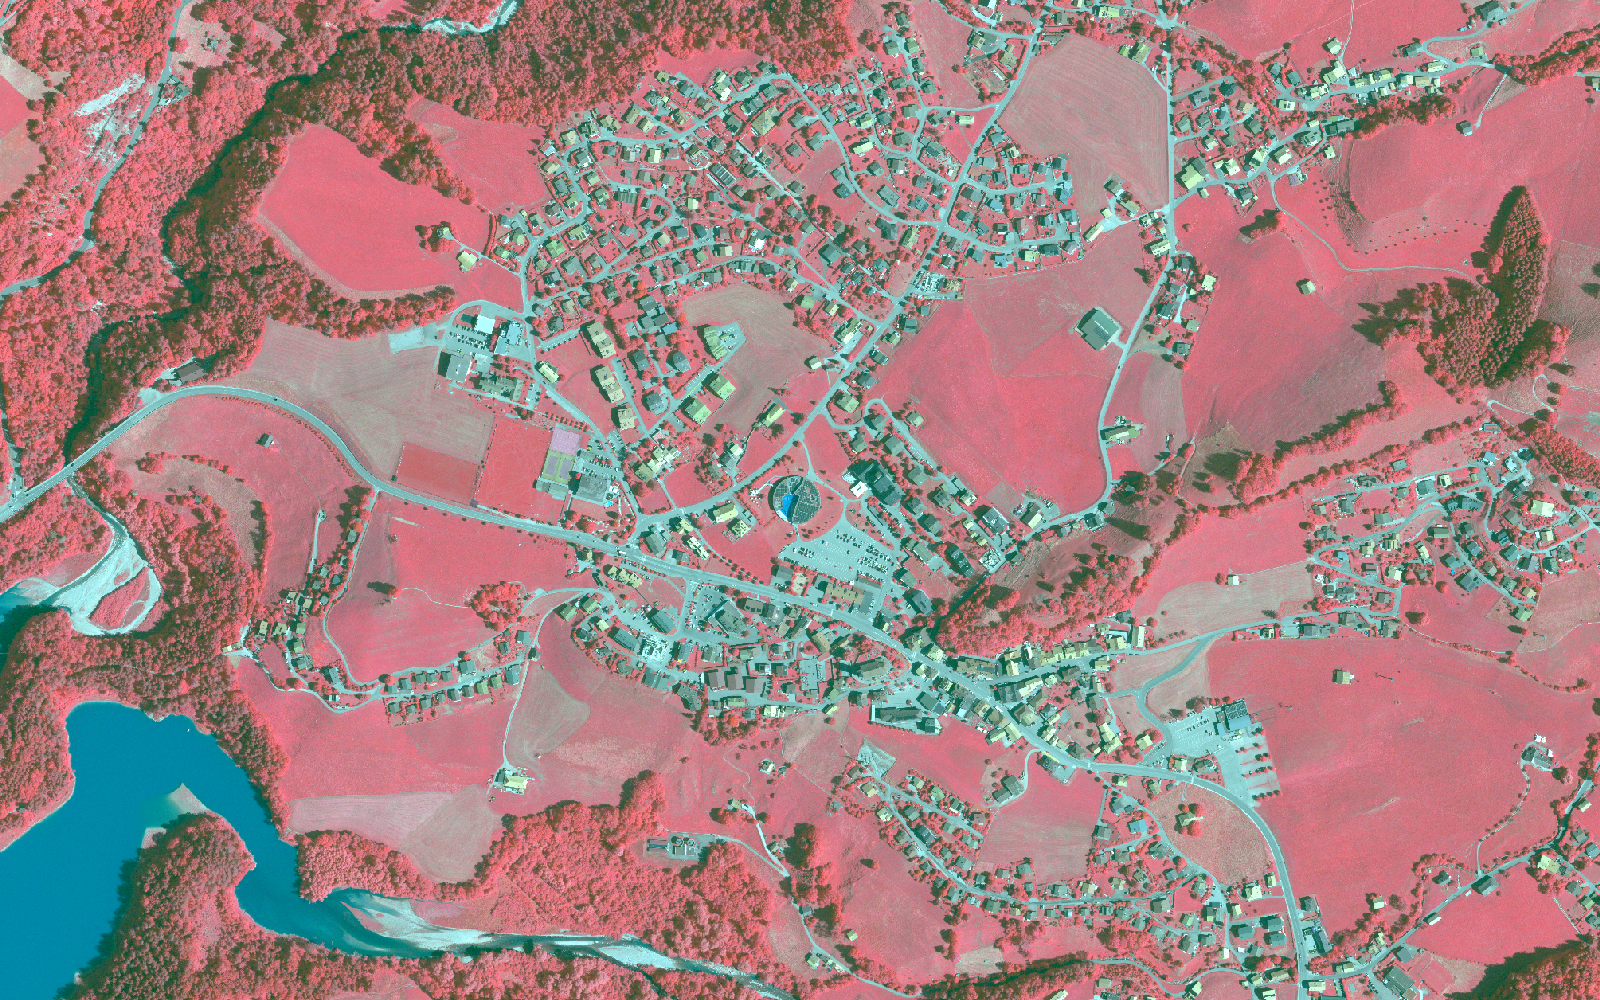 The picture shows an infrared aerial view of the Charmey area (FR).  